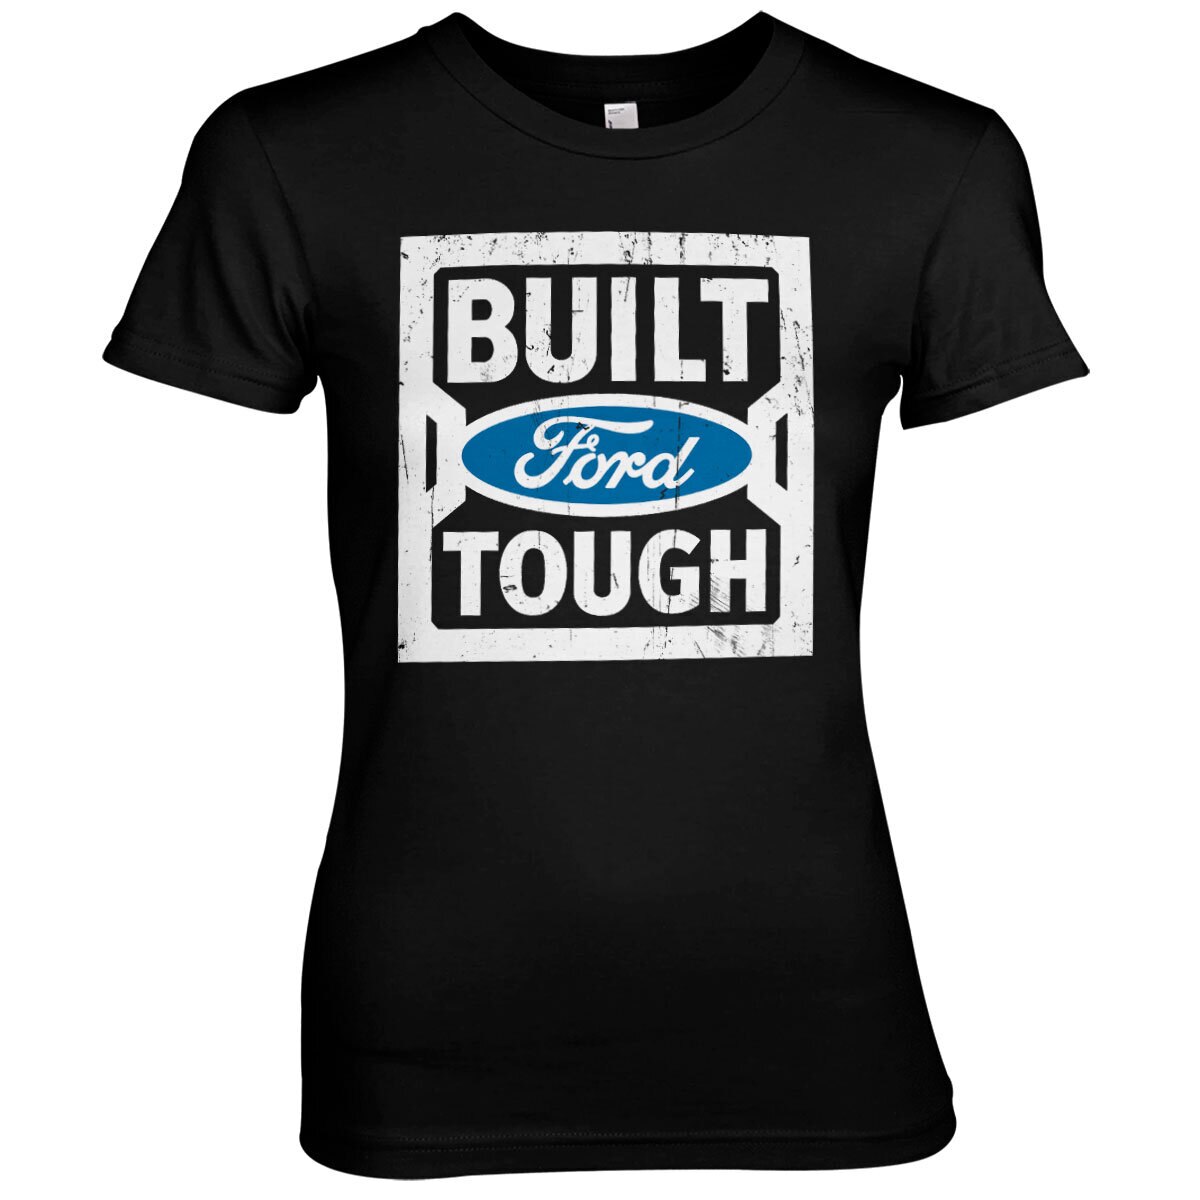 Ford - Built Tough Girly Tee